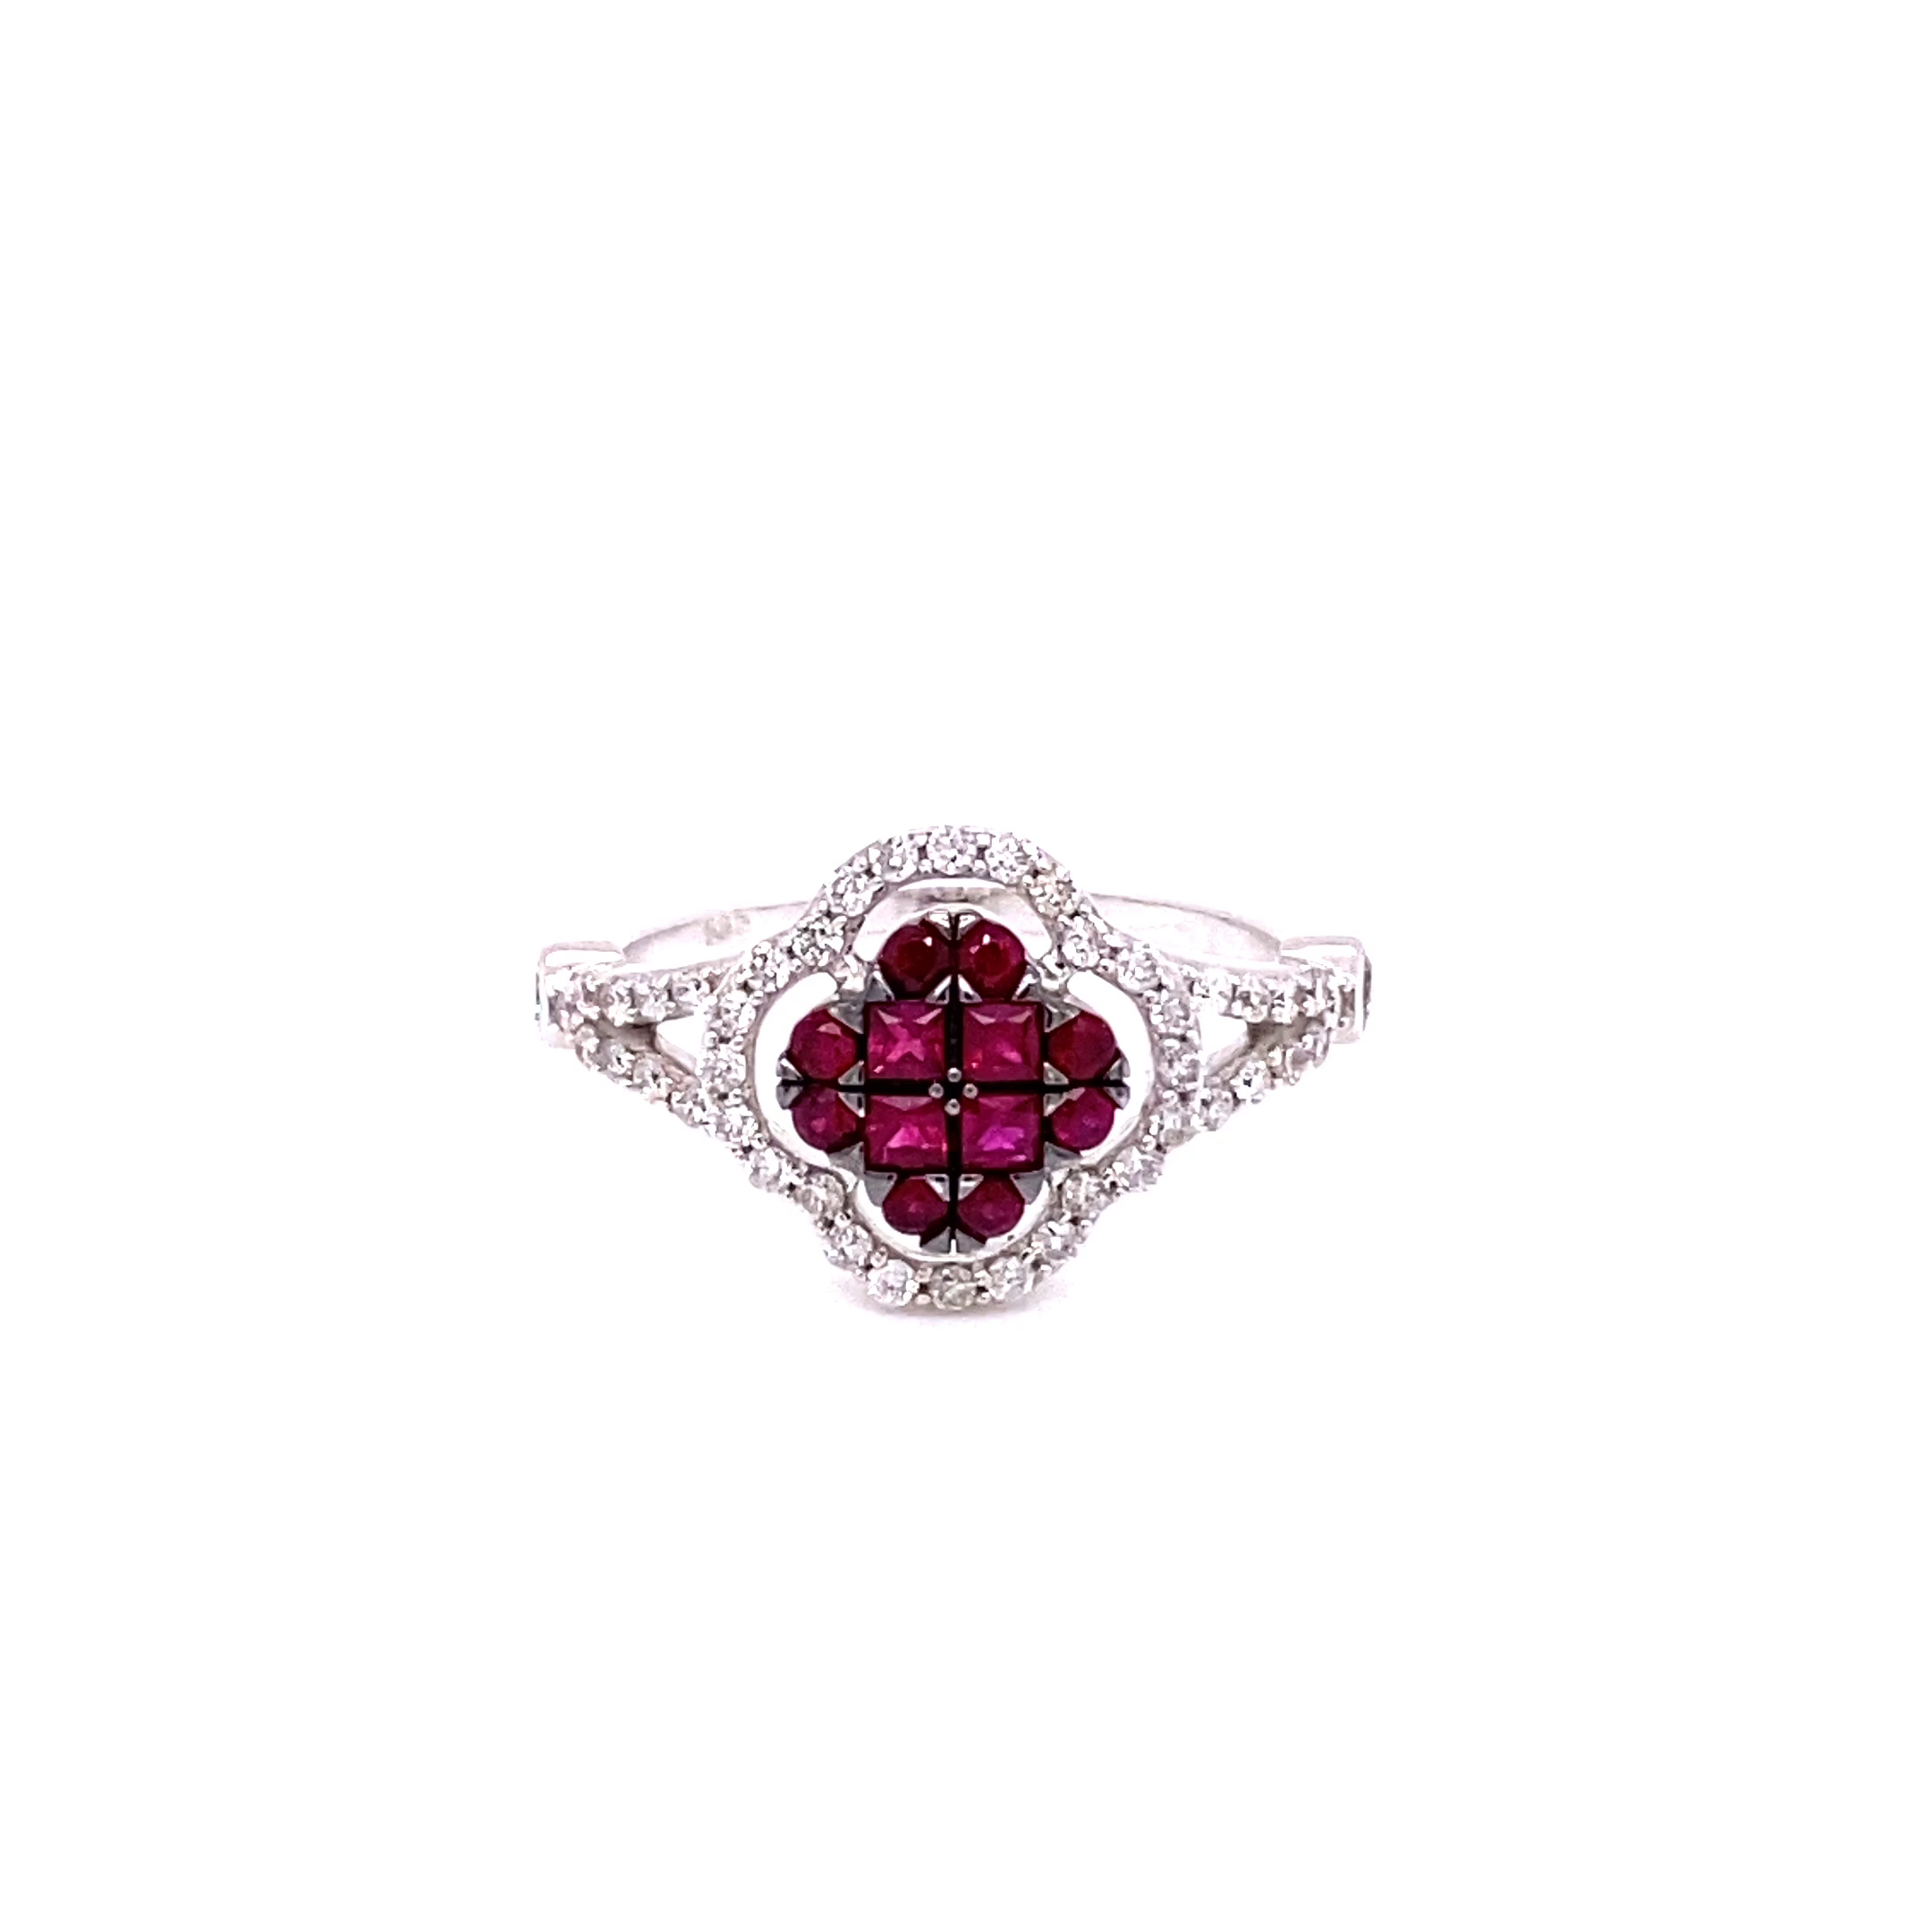 14KW Rubies With A Halo and Accent Diamonds Fashion Ring